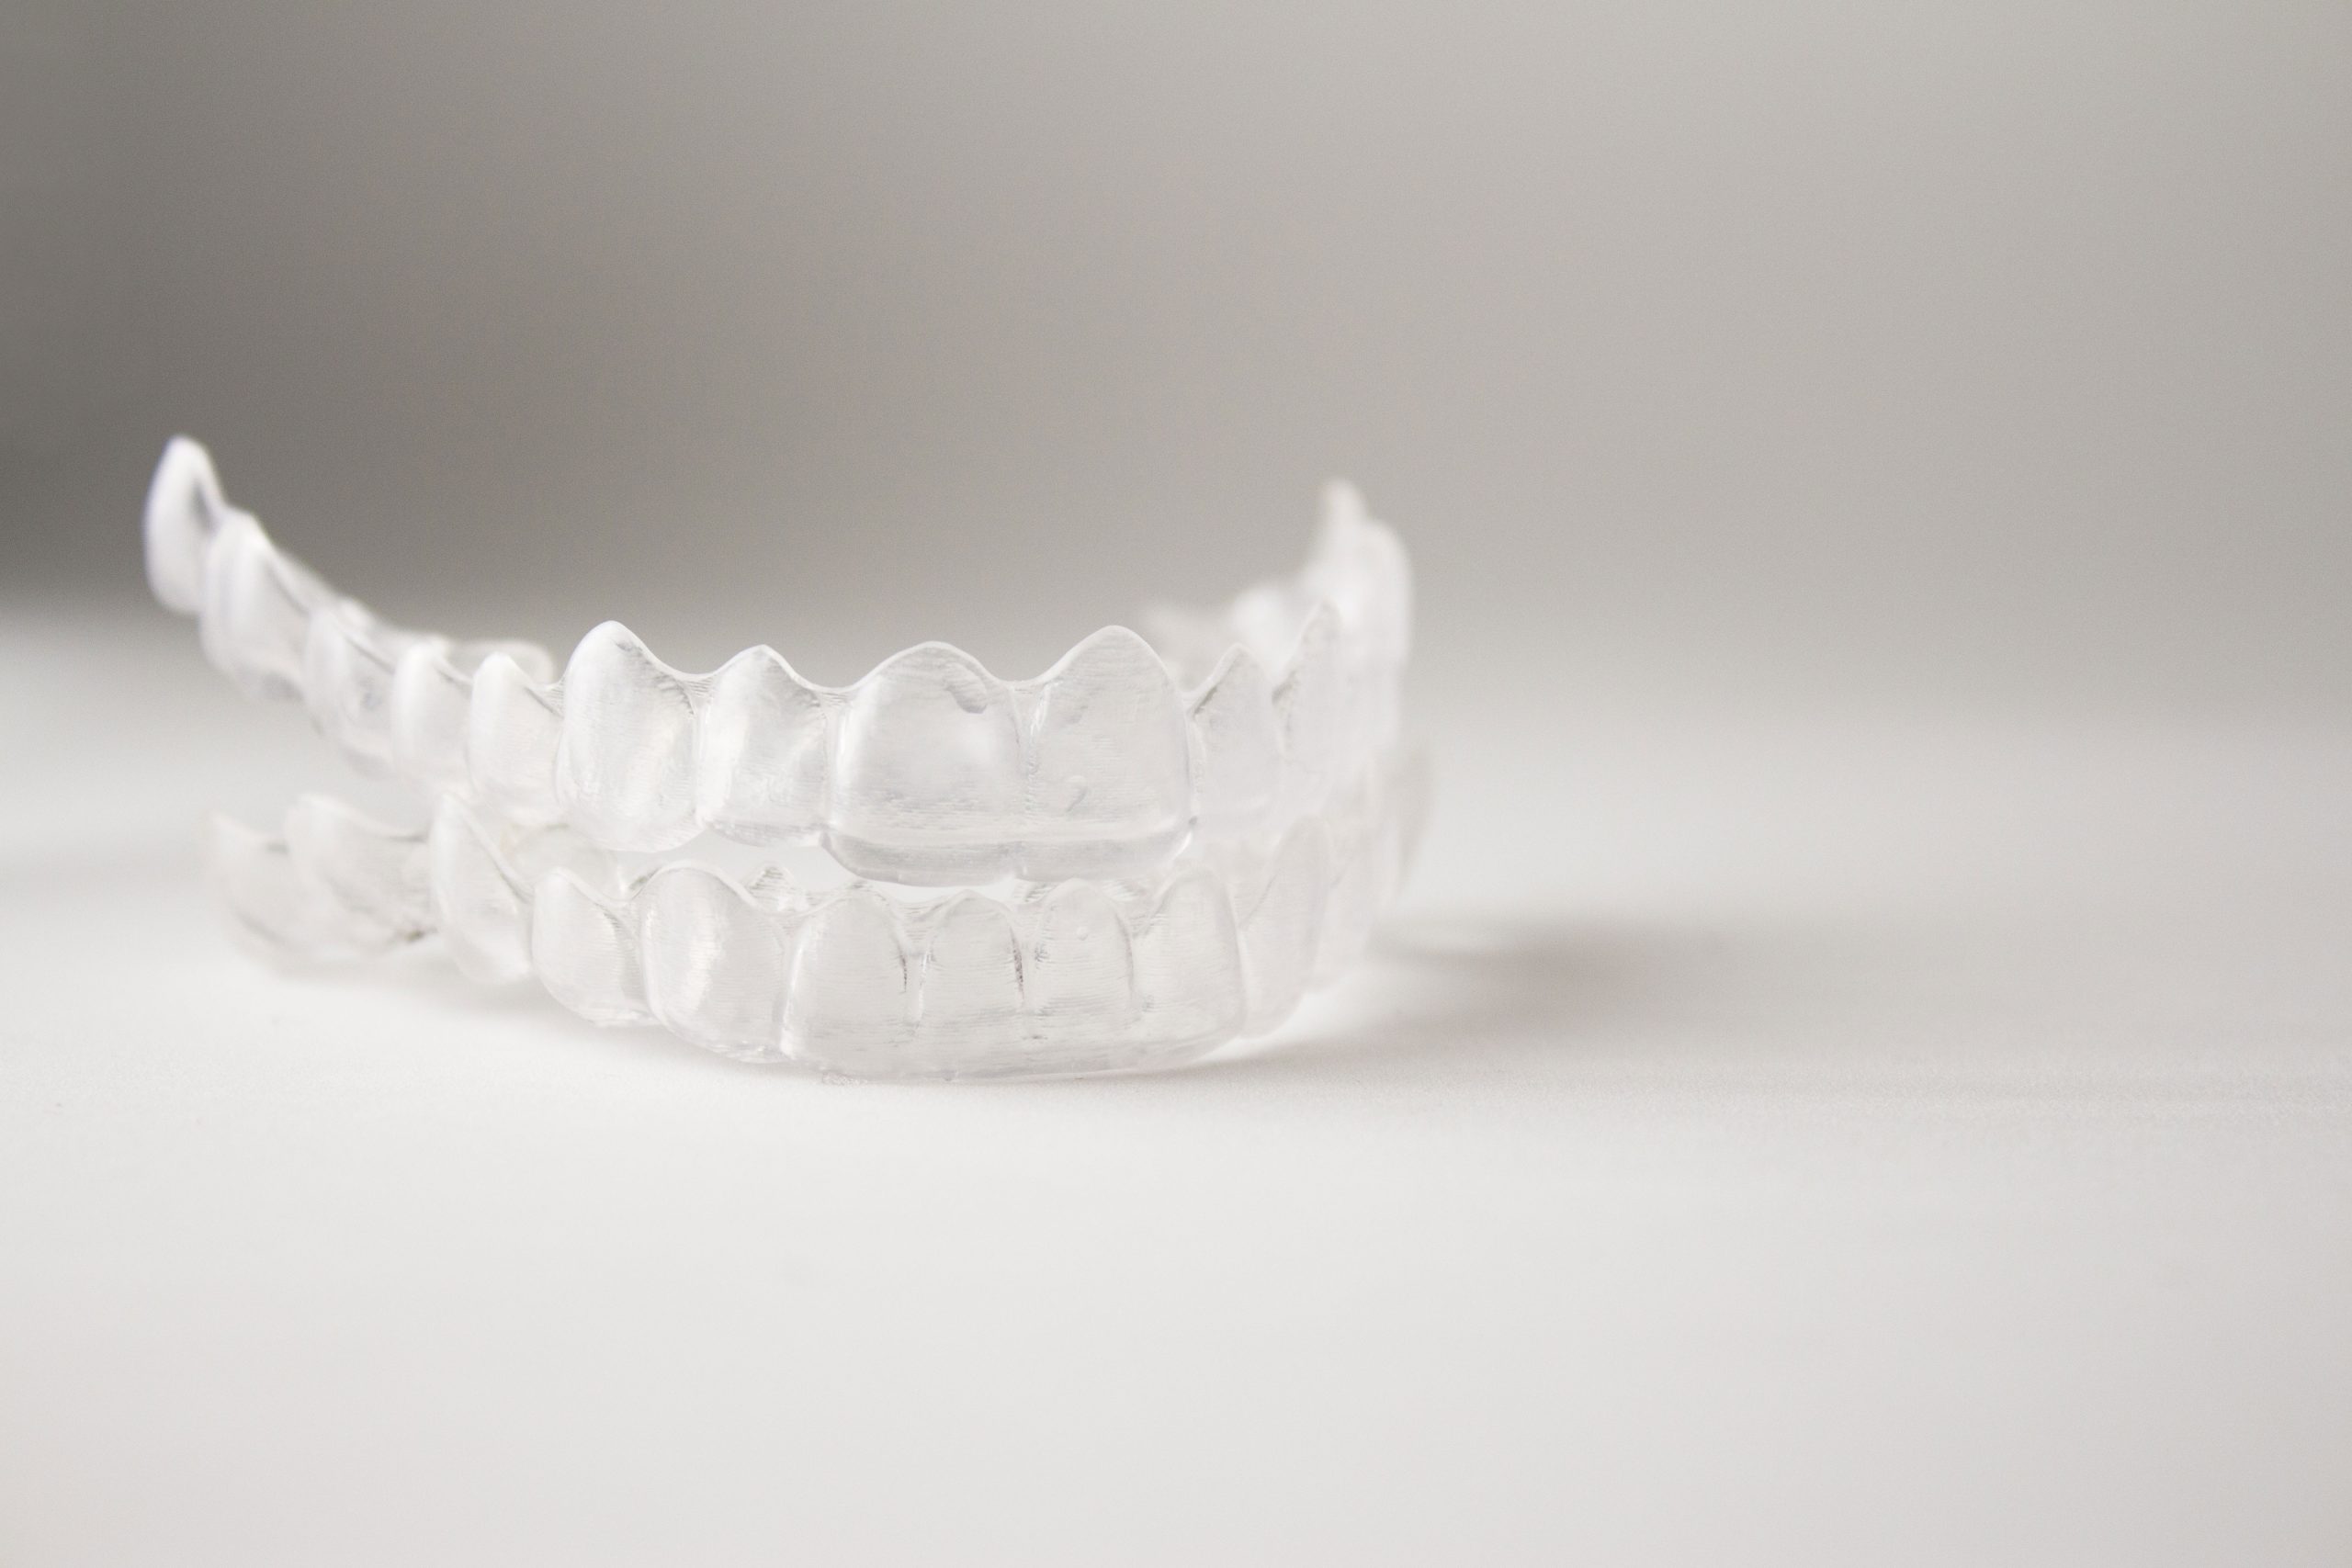 Invisalign Cost  How Much Does Invisalign Cost in Bc